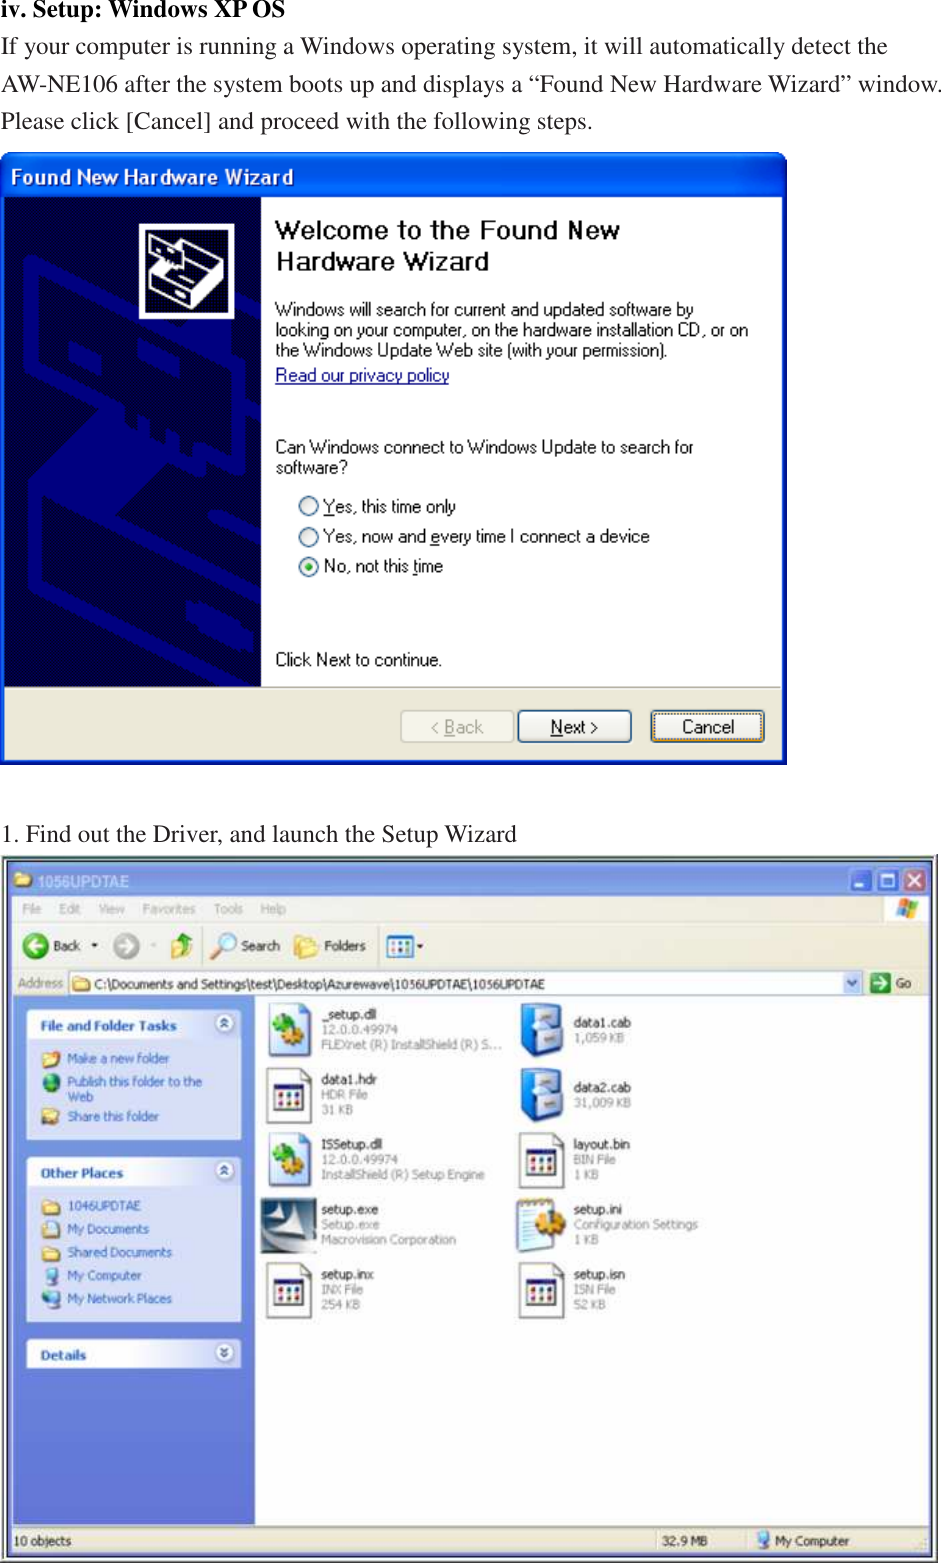 iv. Setup: Windows XP OS If your computer is running a Windows operating system, it will automatically detect the AW-NE106 after the system boots up and displays a “Found New Hardware Wizard” window. Please click [Cancel] and proceed with the following steps.   1. Find out the Driver, and launch the Setup Wizard  